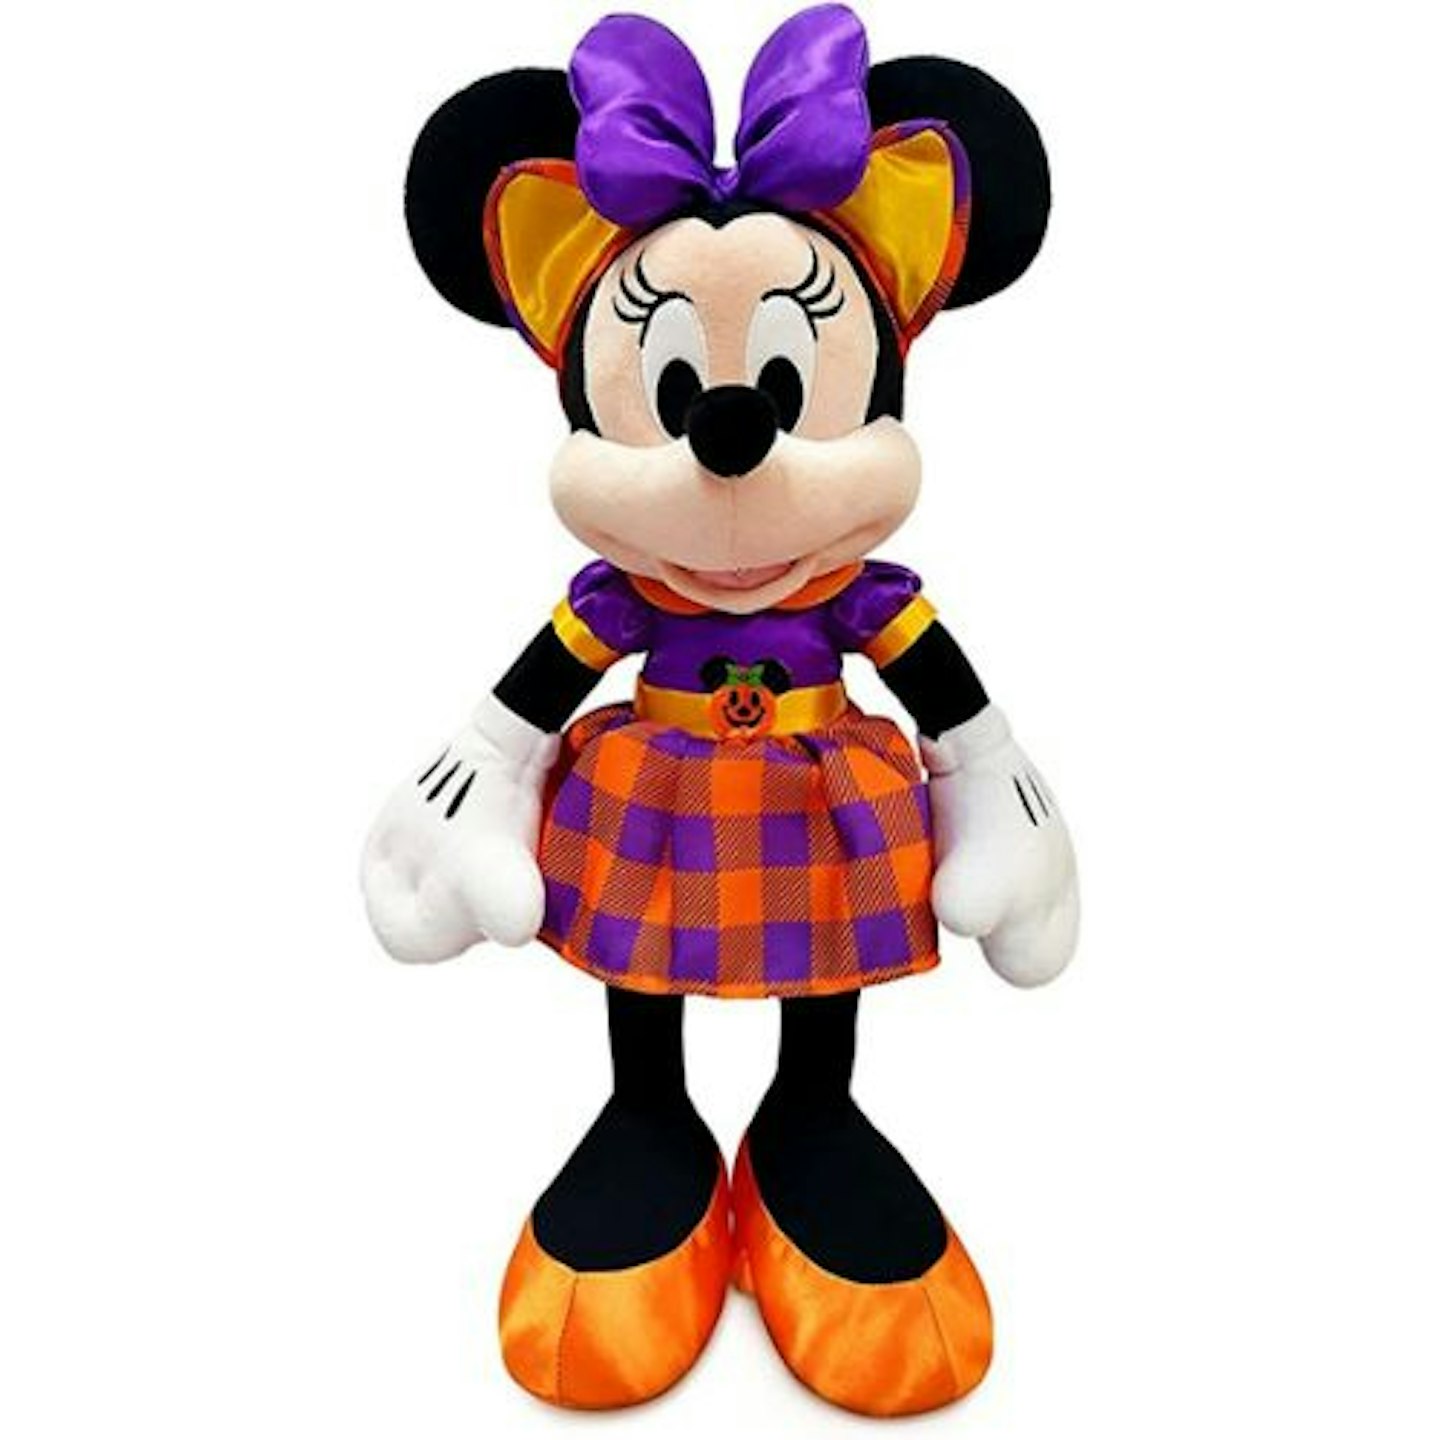 Disney Store Minnie Mouse Halloween Small Soft Plush Toy